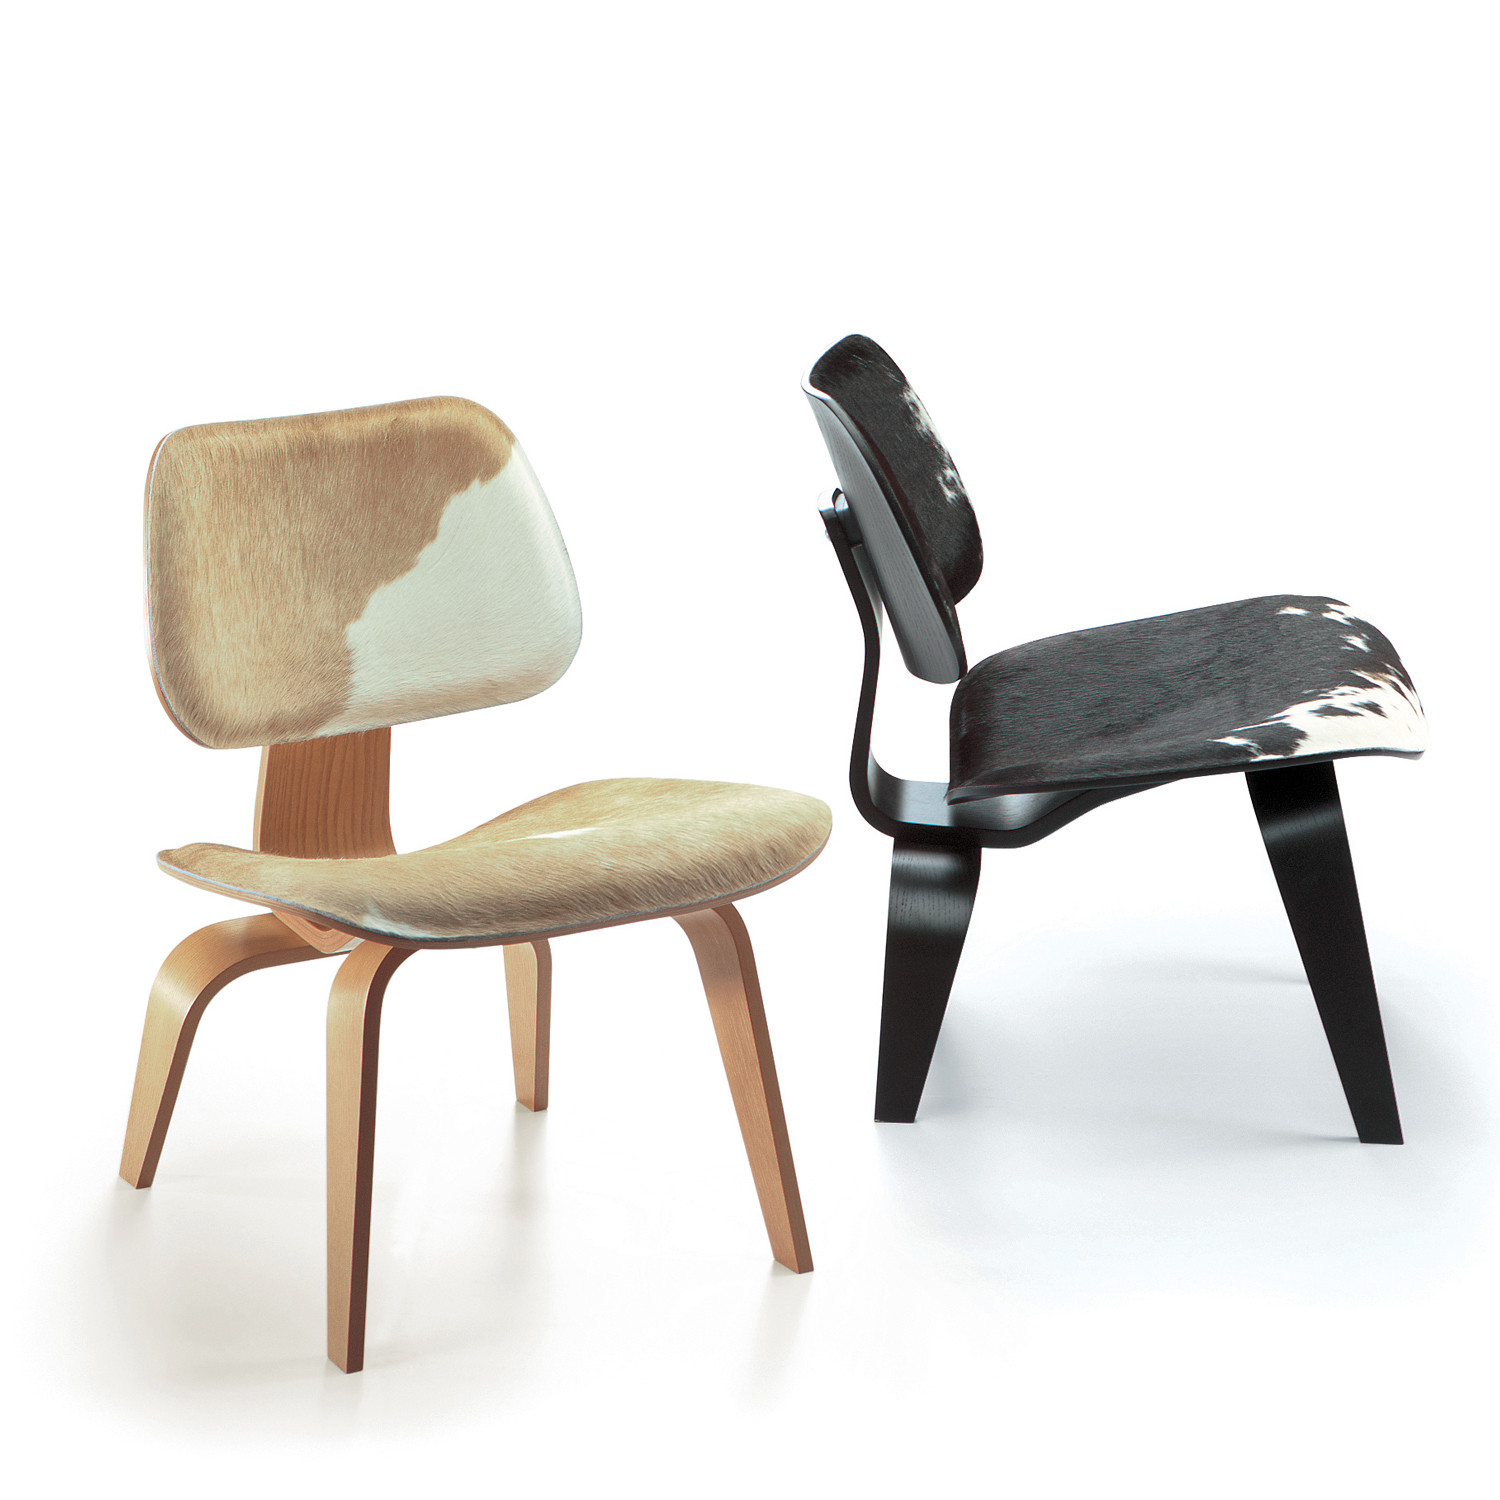 LCW Plywood Low Chairs